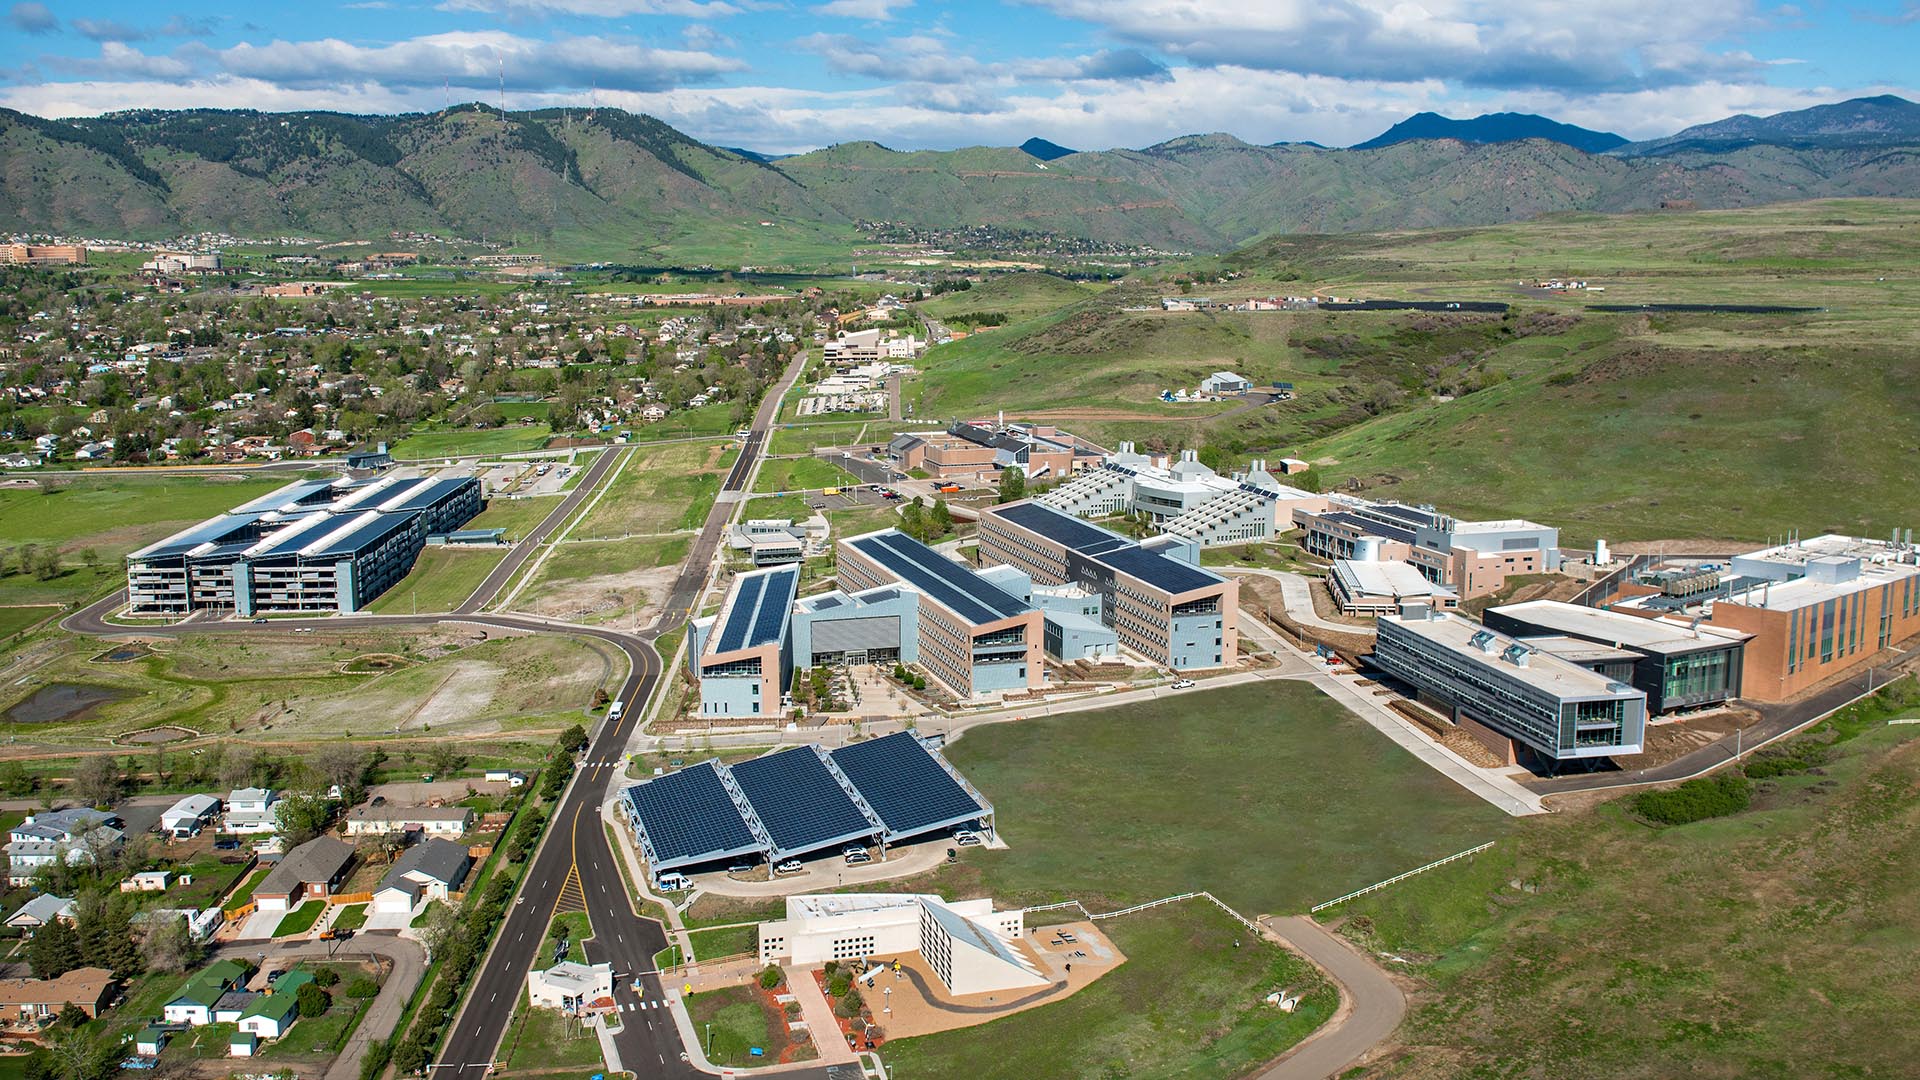 Aerial view of the National Renewable Energy (NREL), South Table Mountain campus